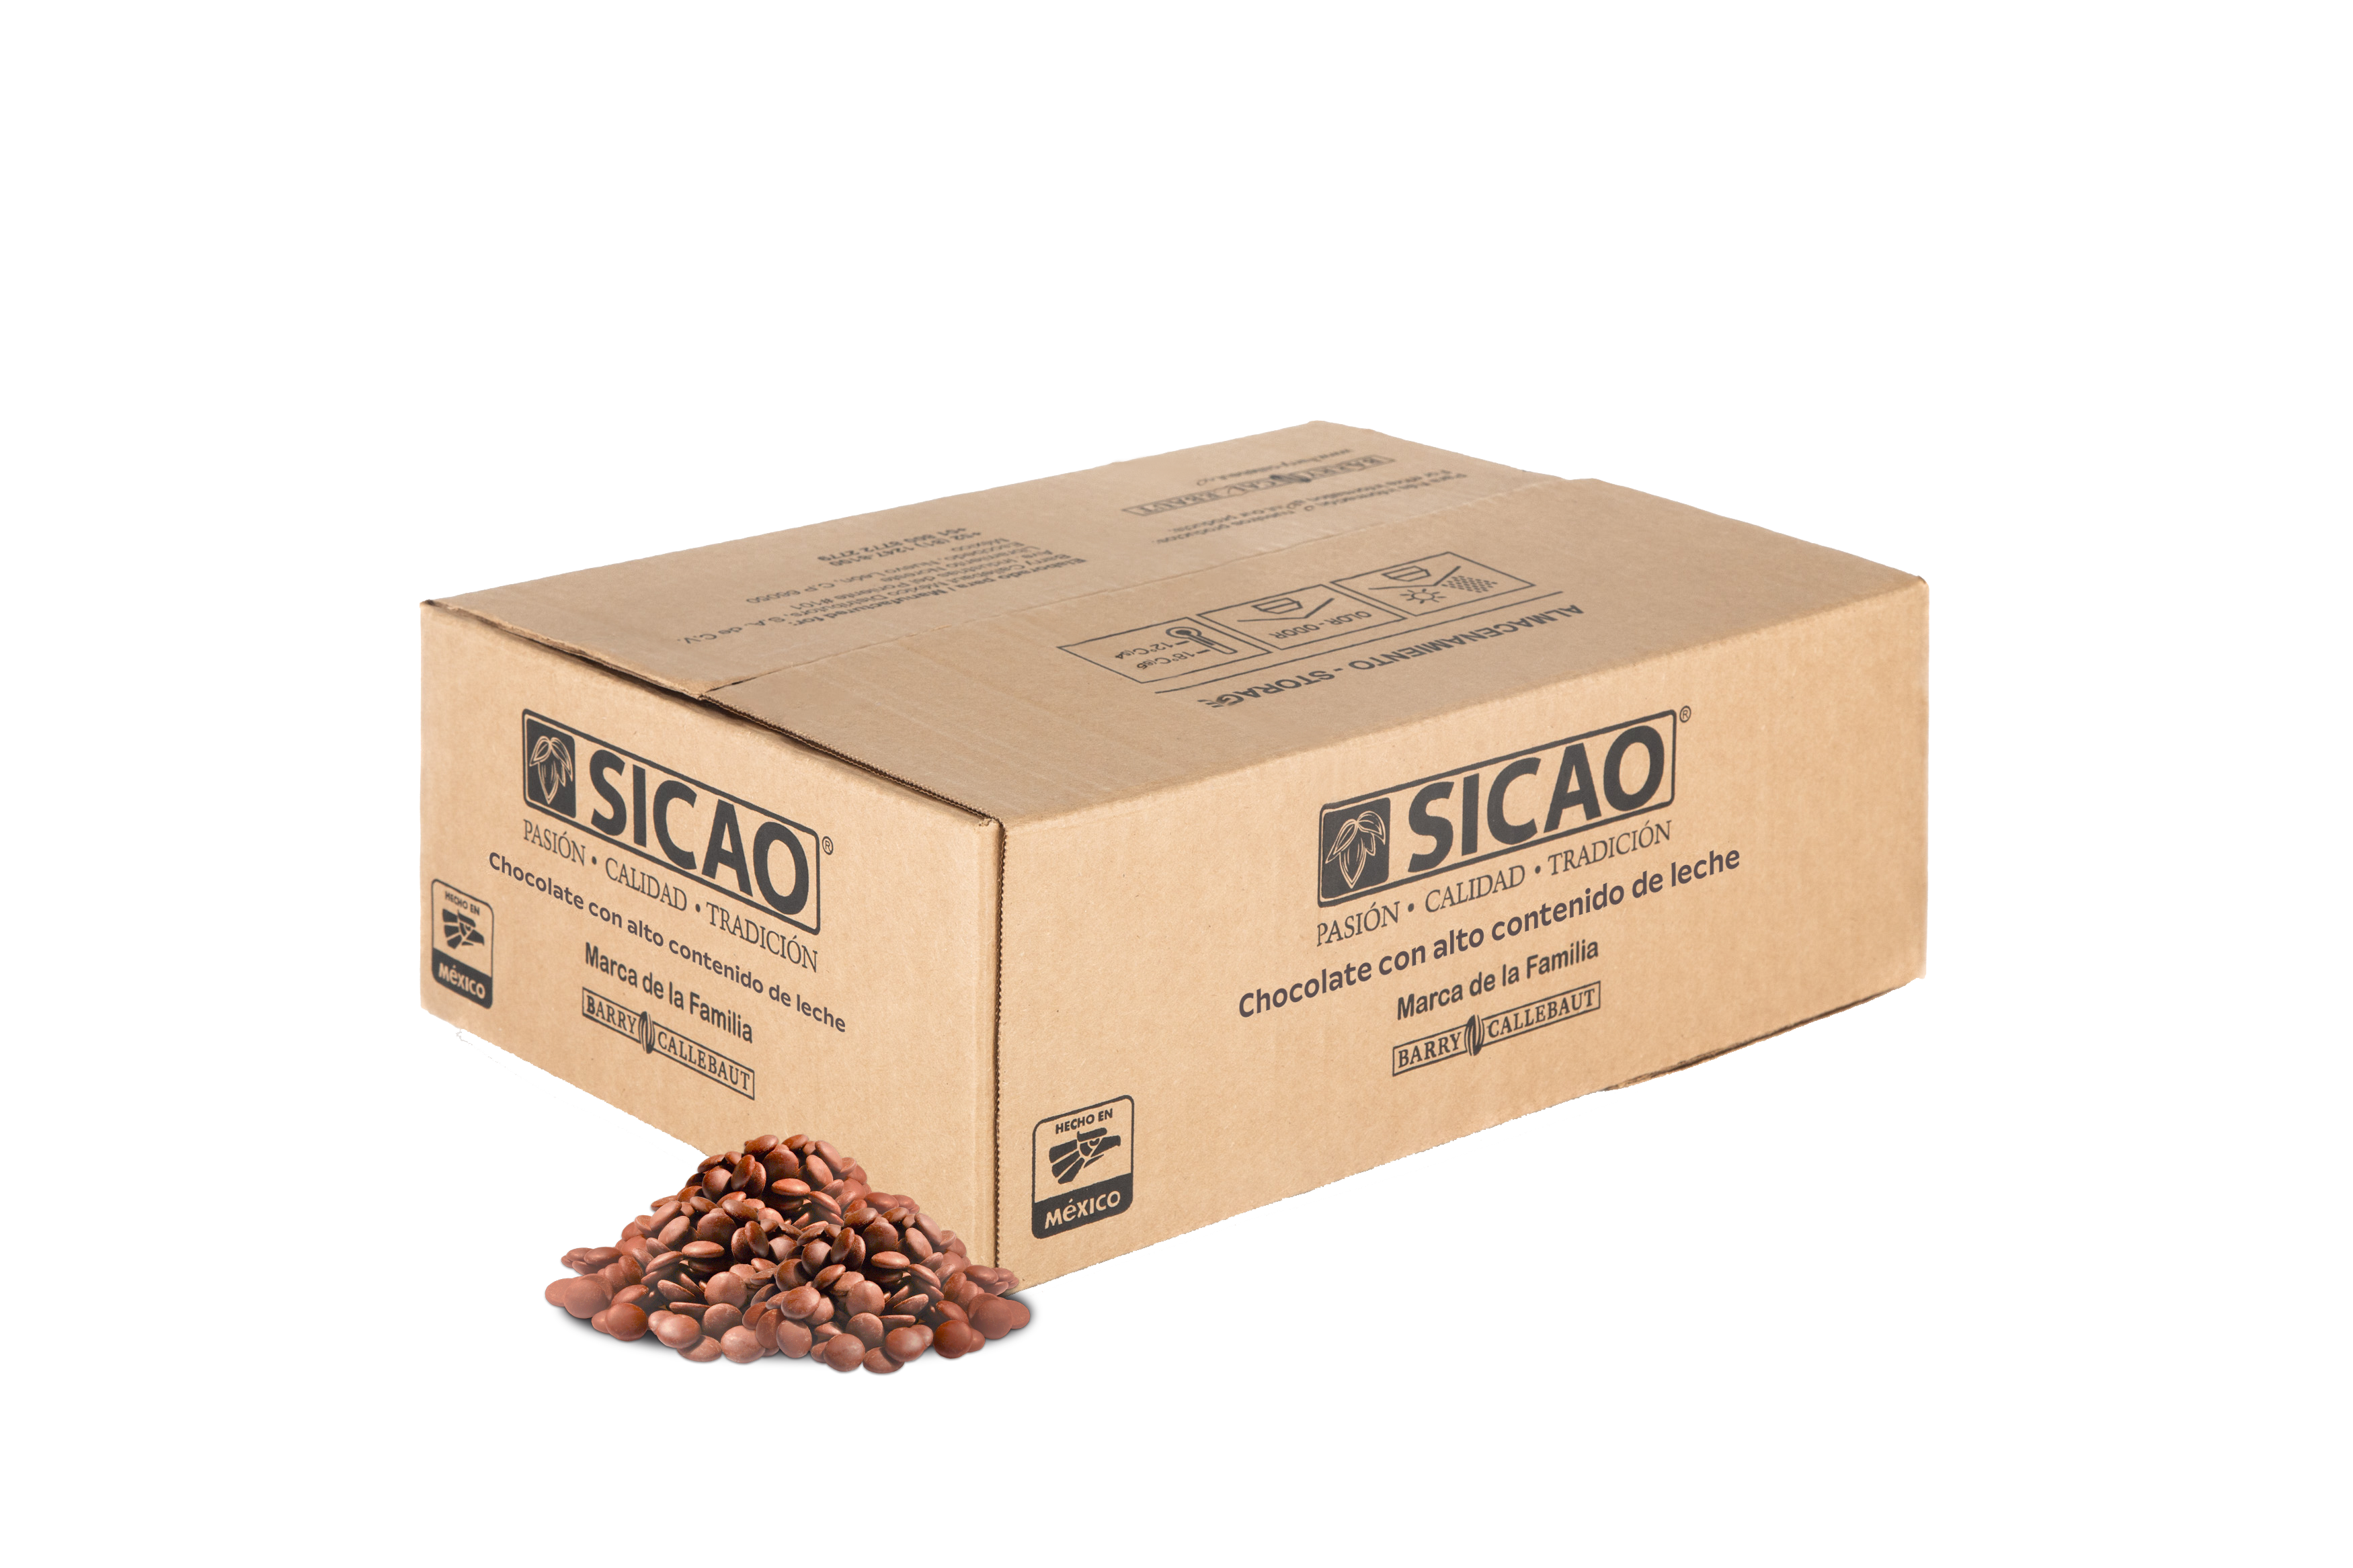 Chocolate - Chocolate con leche - 28.5% Cacao - Wafers - Caja 10 kg (1)